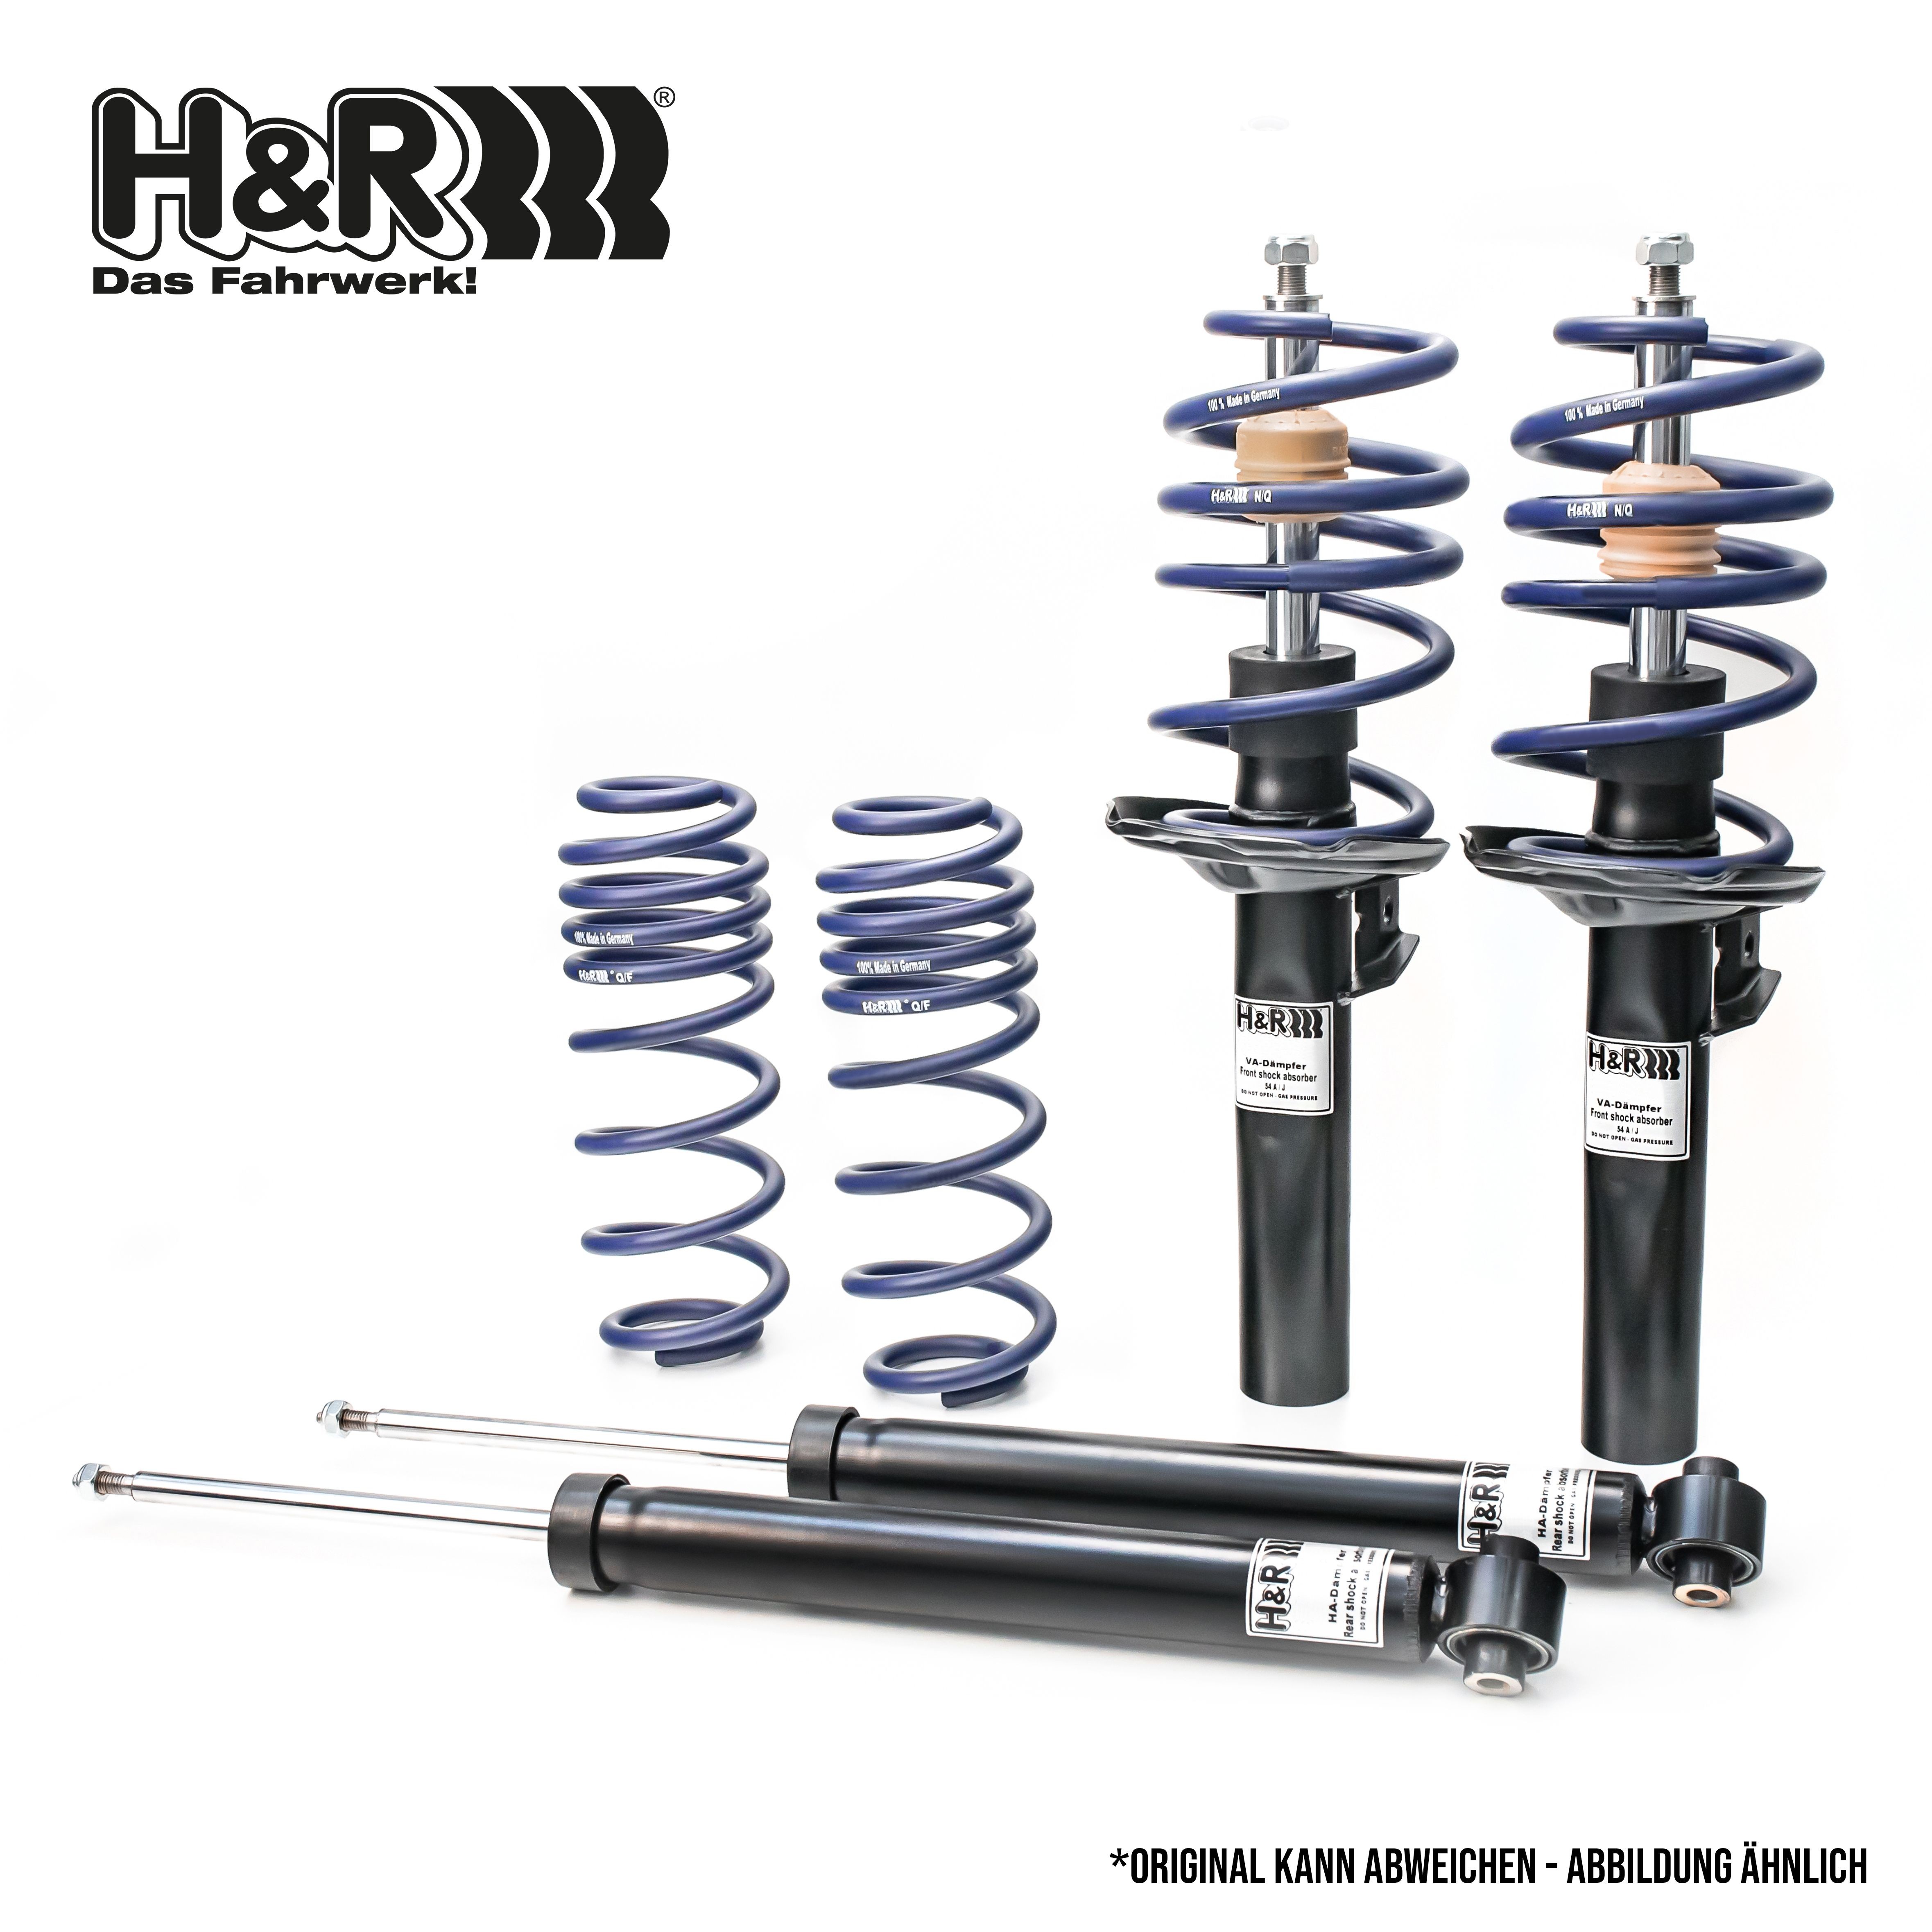 H&R 40742-4 Suspension kit, coil springs / shock absorbers BMW 5 Series 2004 in original quality